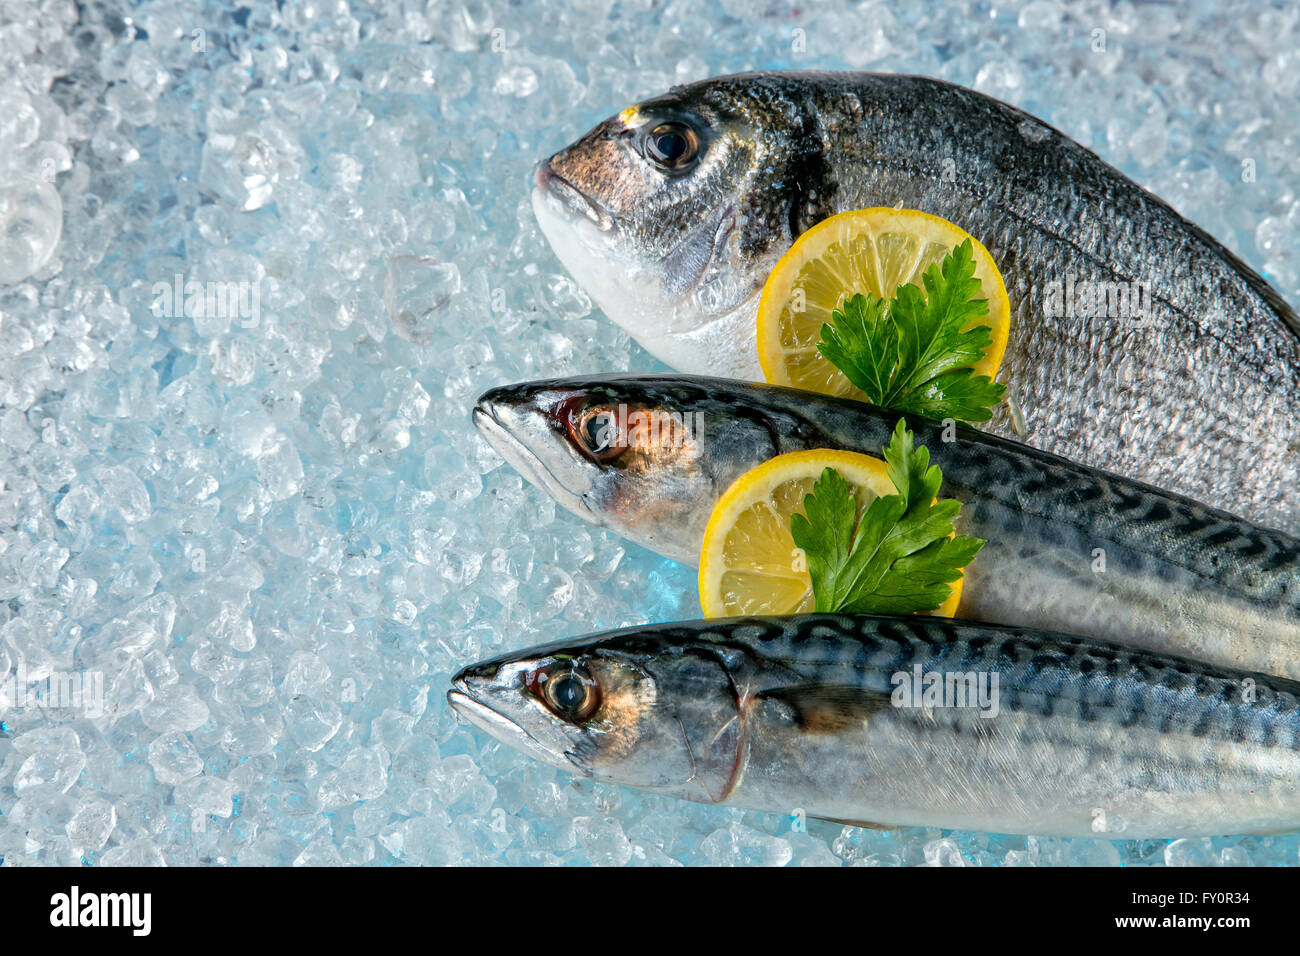 Fish placed on ice drift Stock Photo